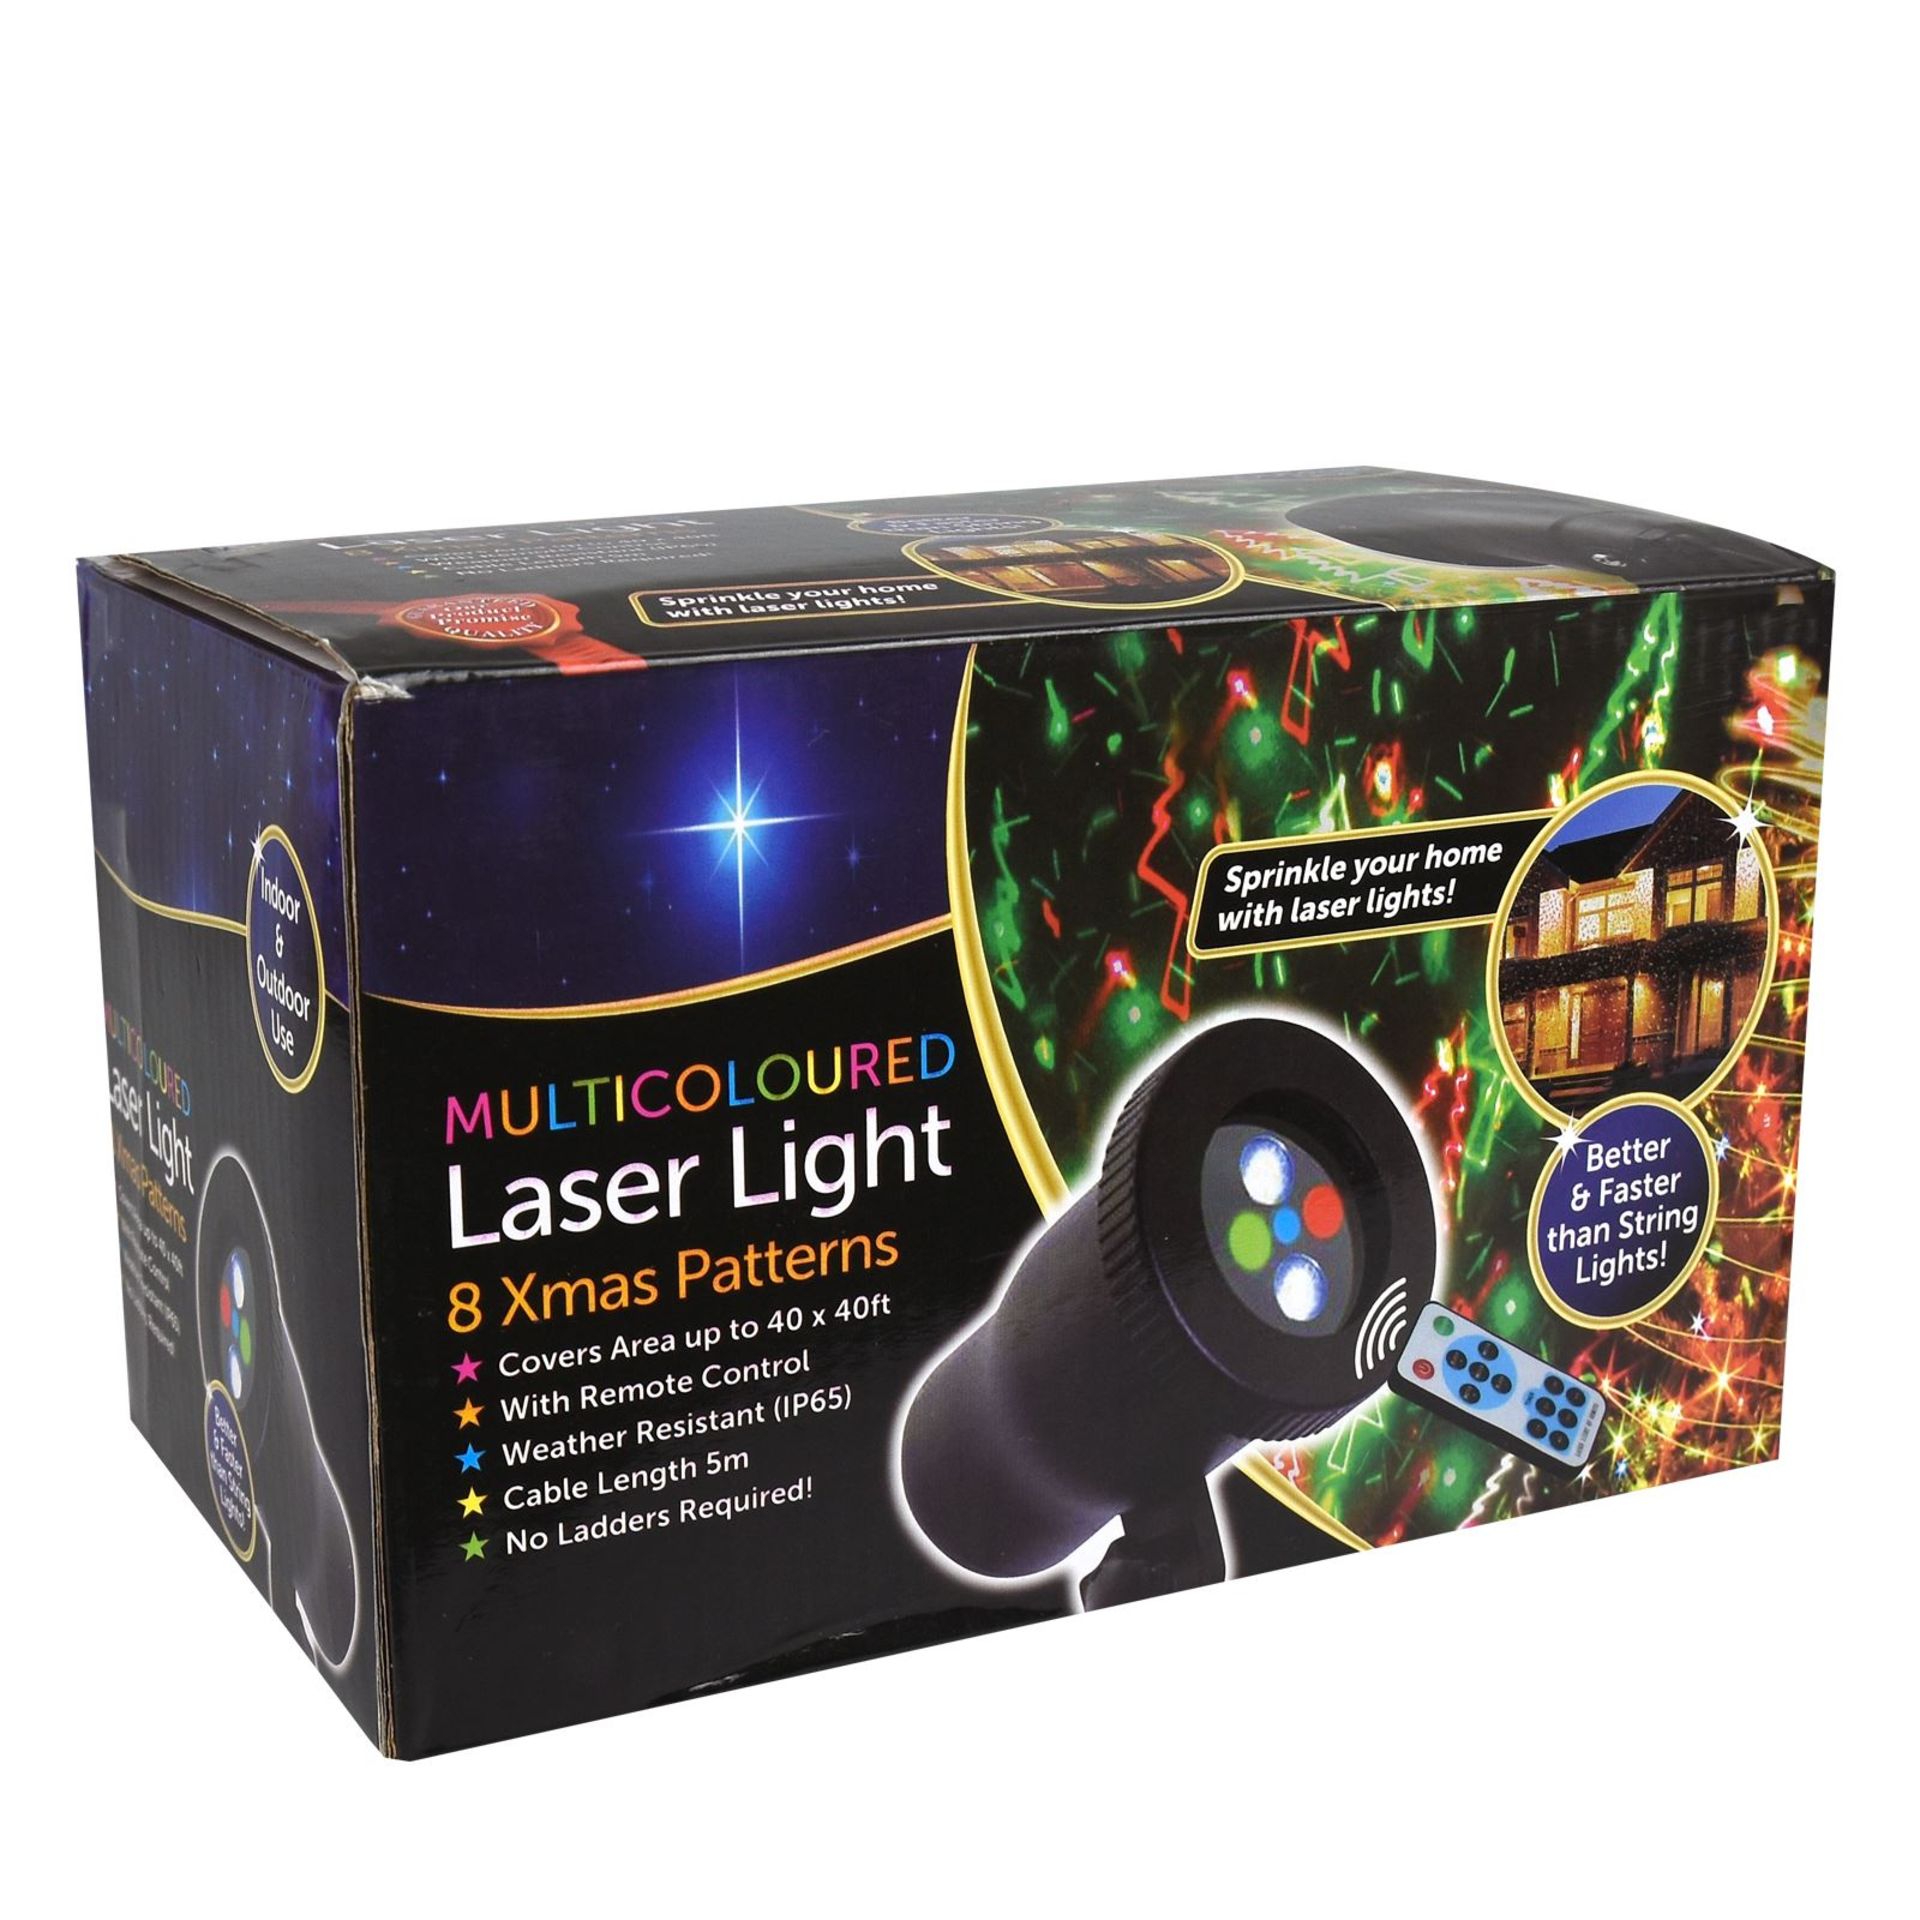 V Brand New Multicoloured 8 Christmas Pattern Laser Light - Covers Area Up To 40 x 40ft - Weather